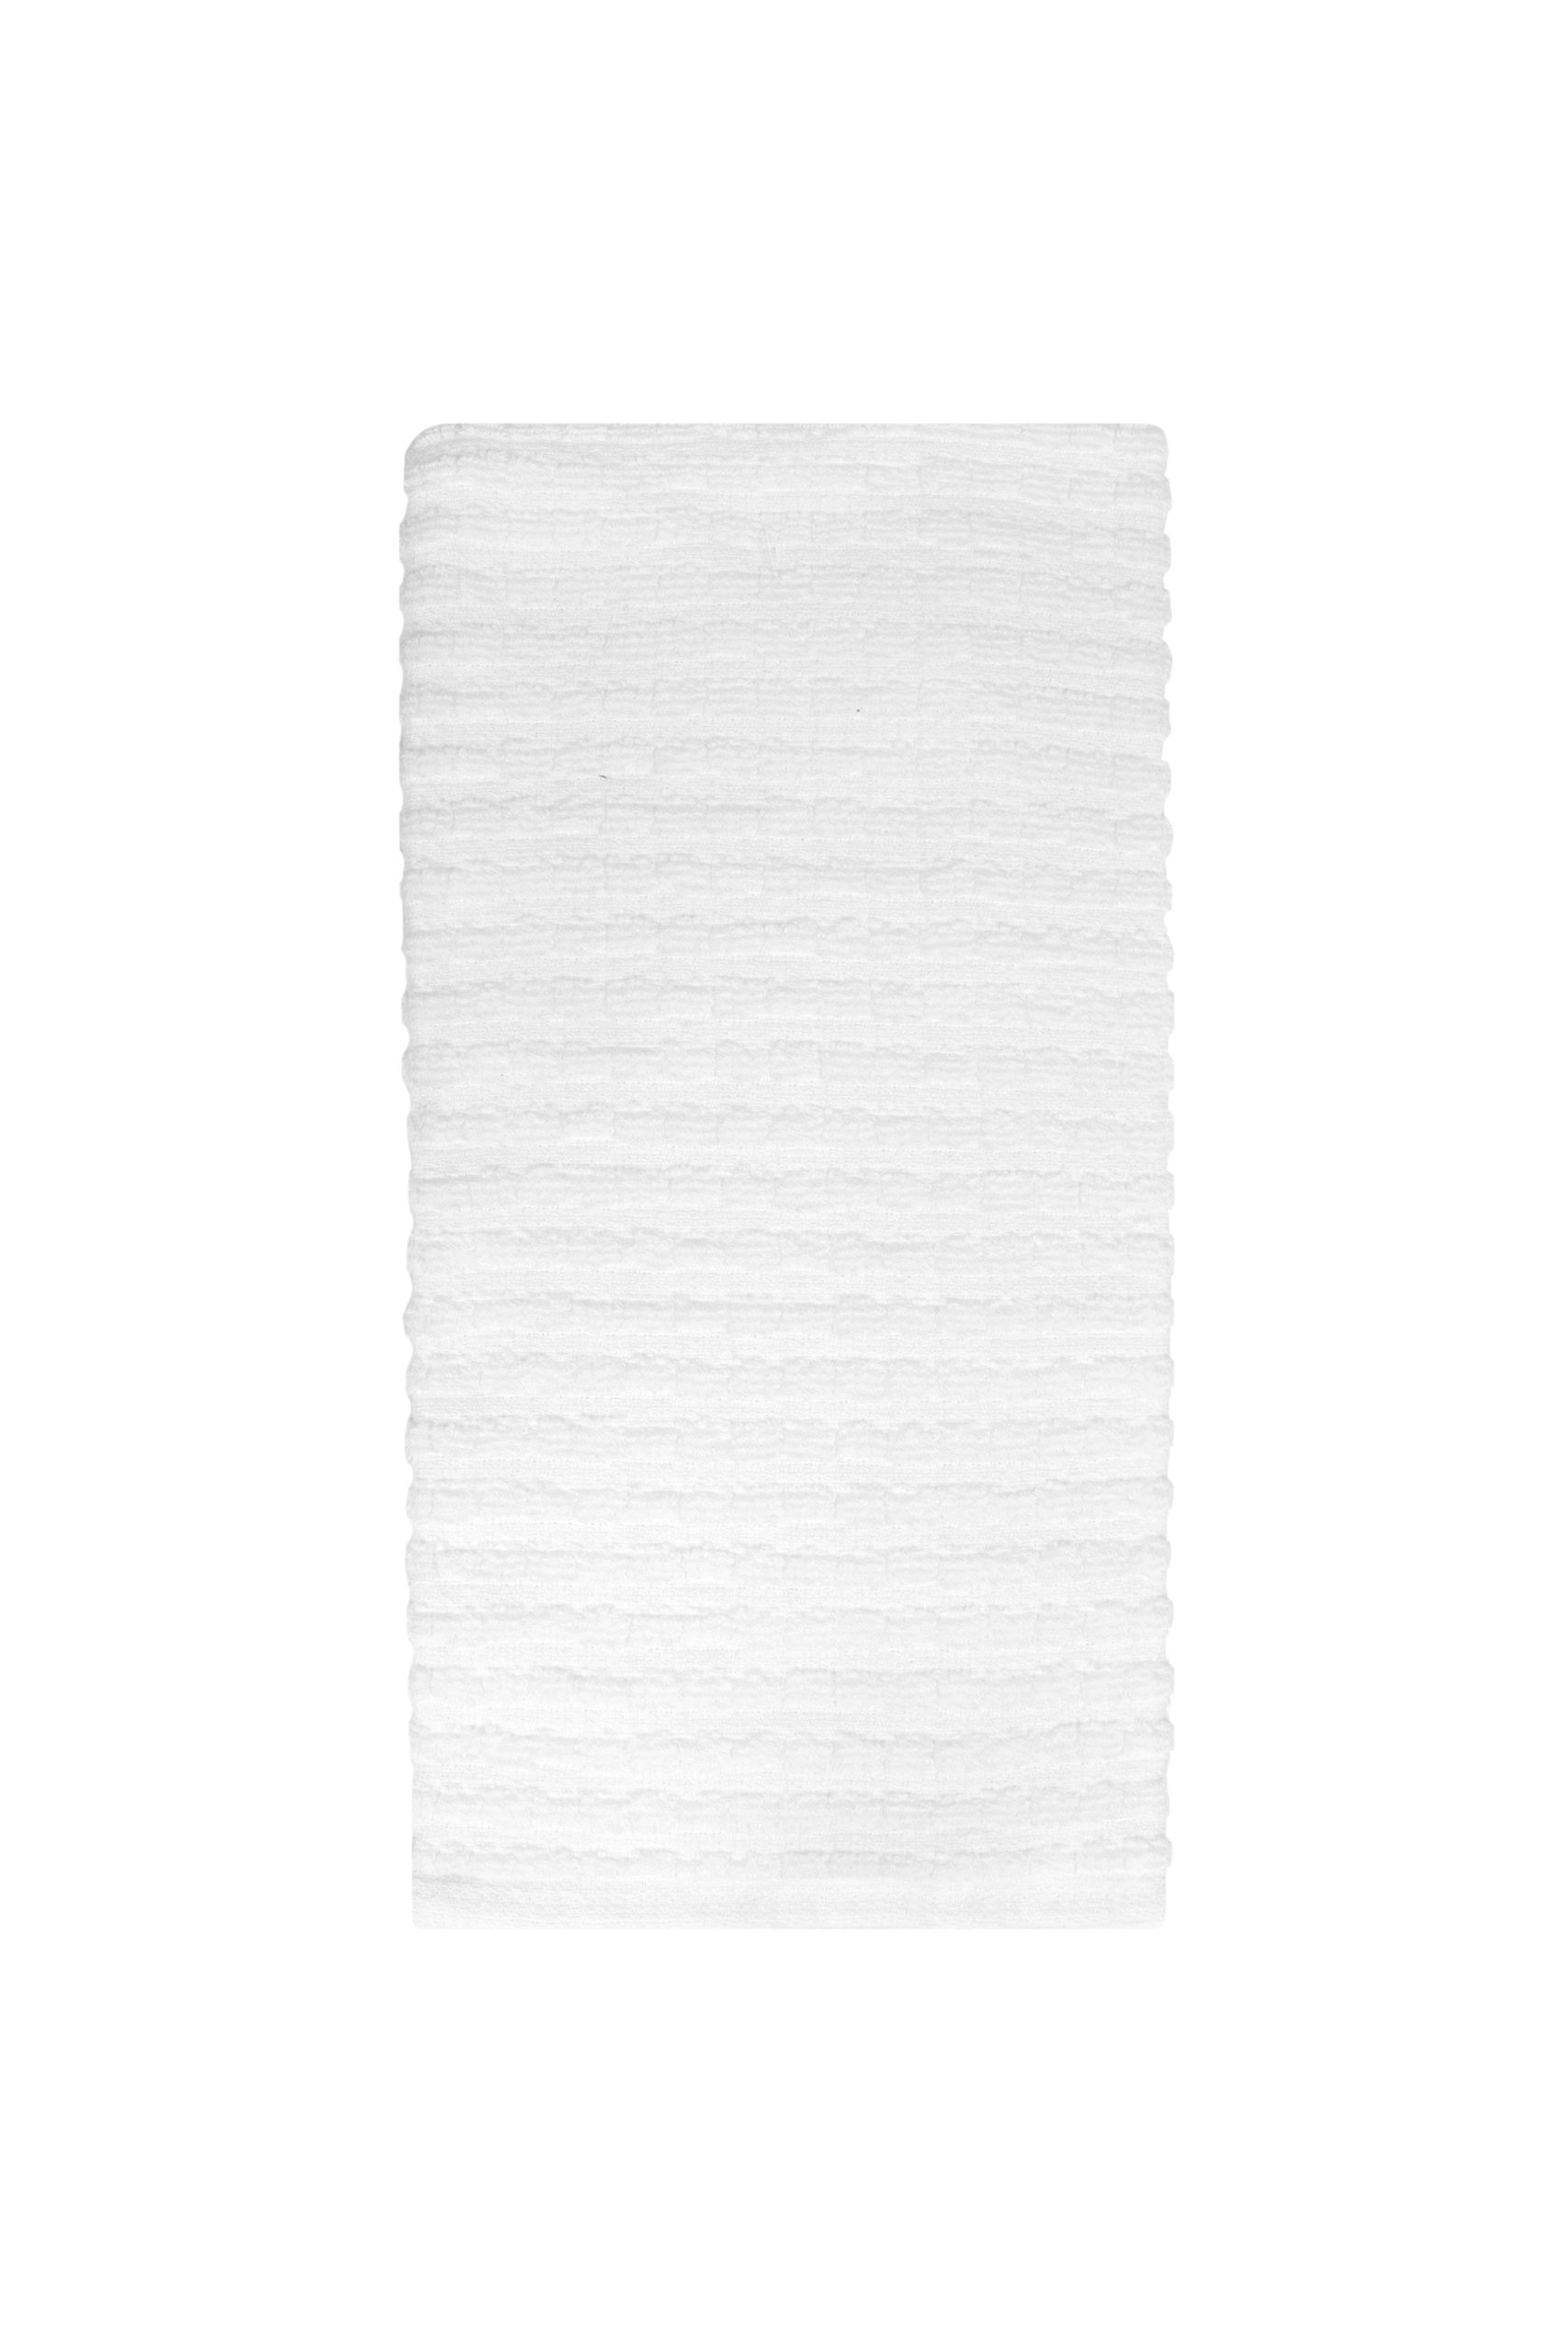 Ritz Royale White Solid Cotton Dish Cloth (Set of 3)